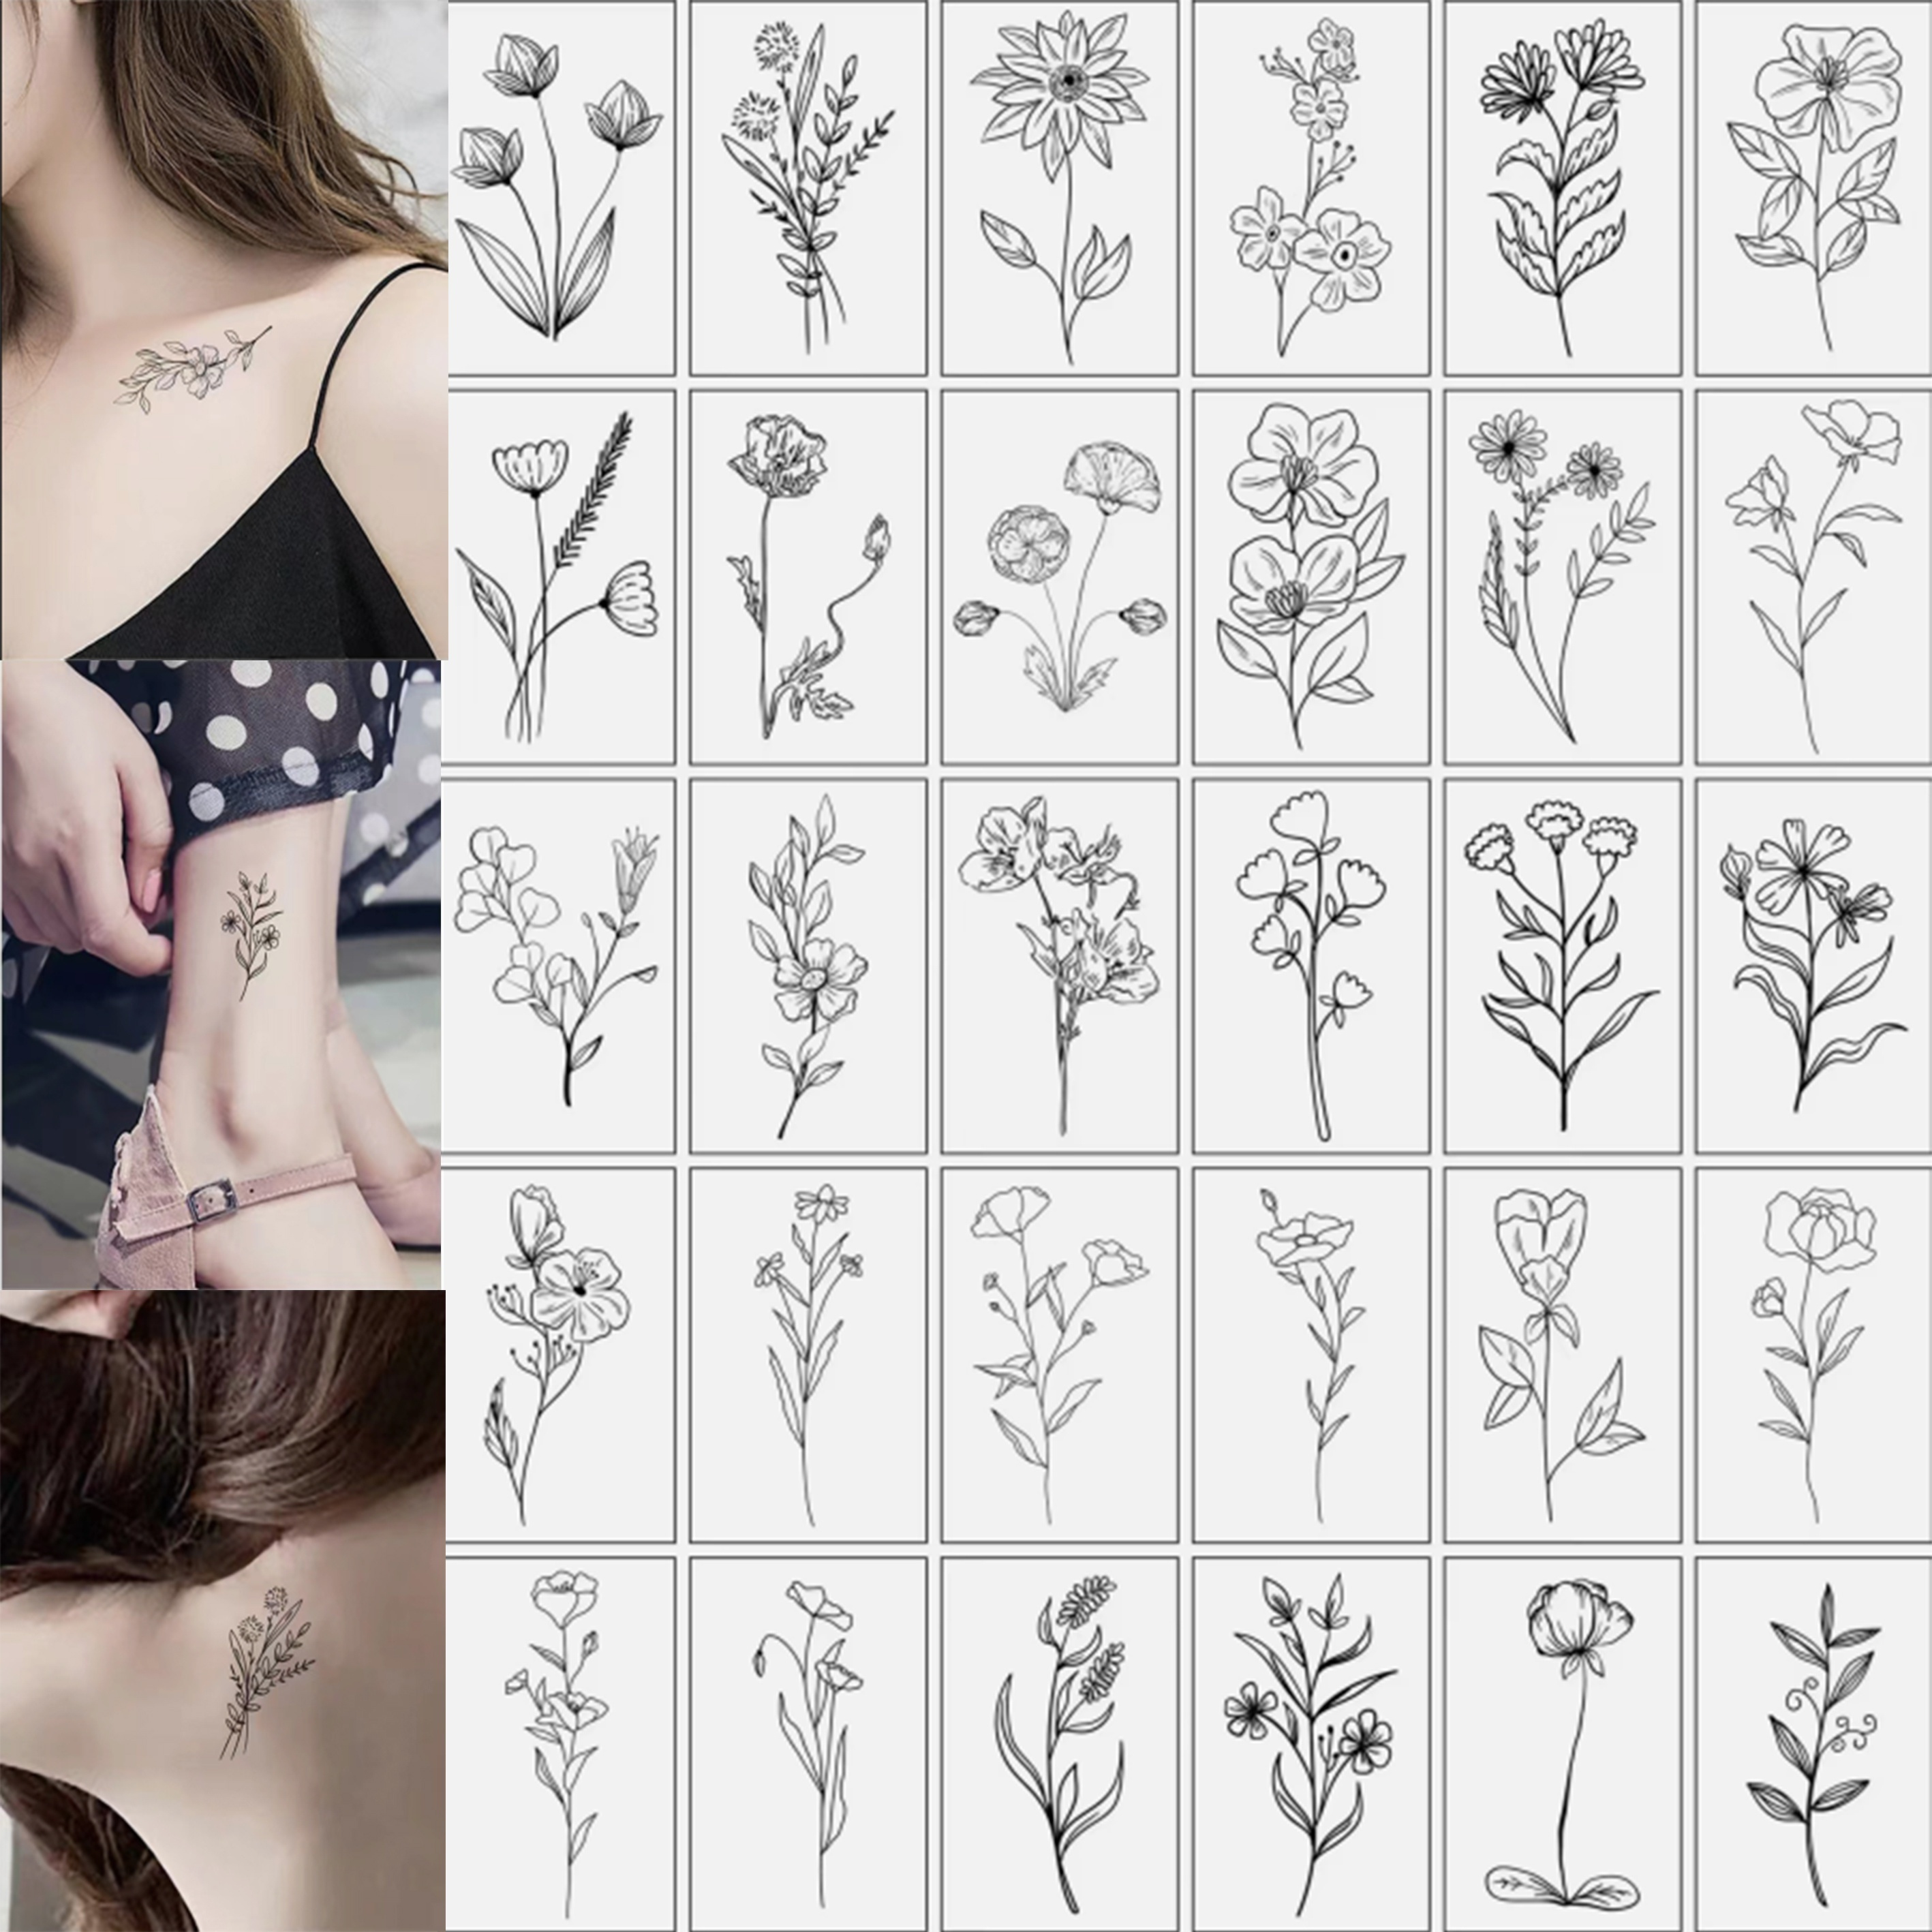 

30 Sheets Waterproof And Long-lasting Line Drawing Flowers Temporary Tattoos - Perfect For 3-6 Days Of Fun And Fashion